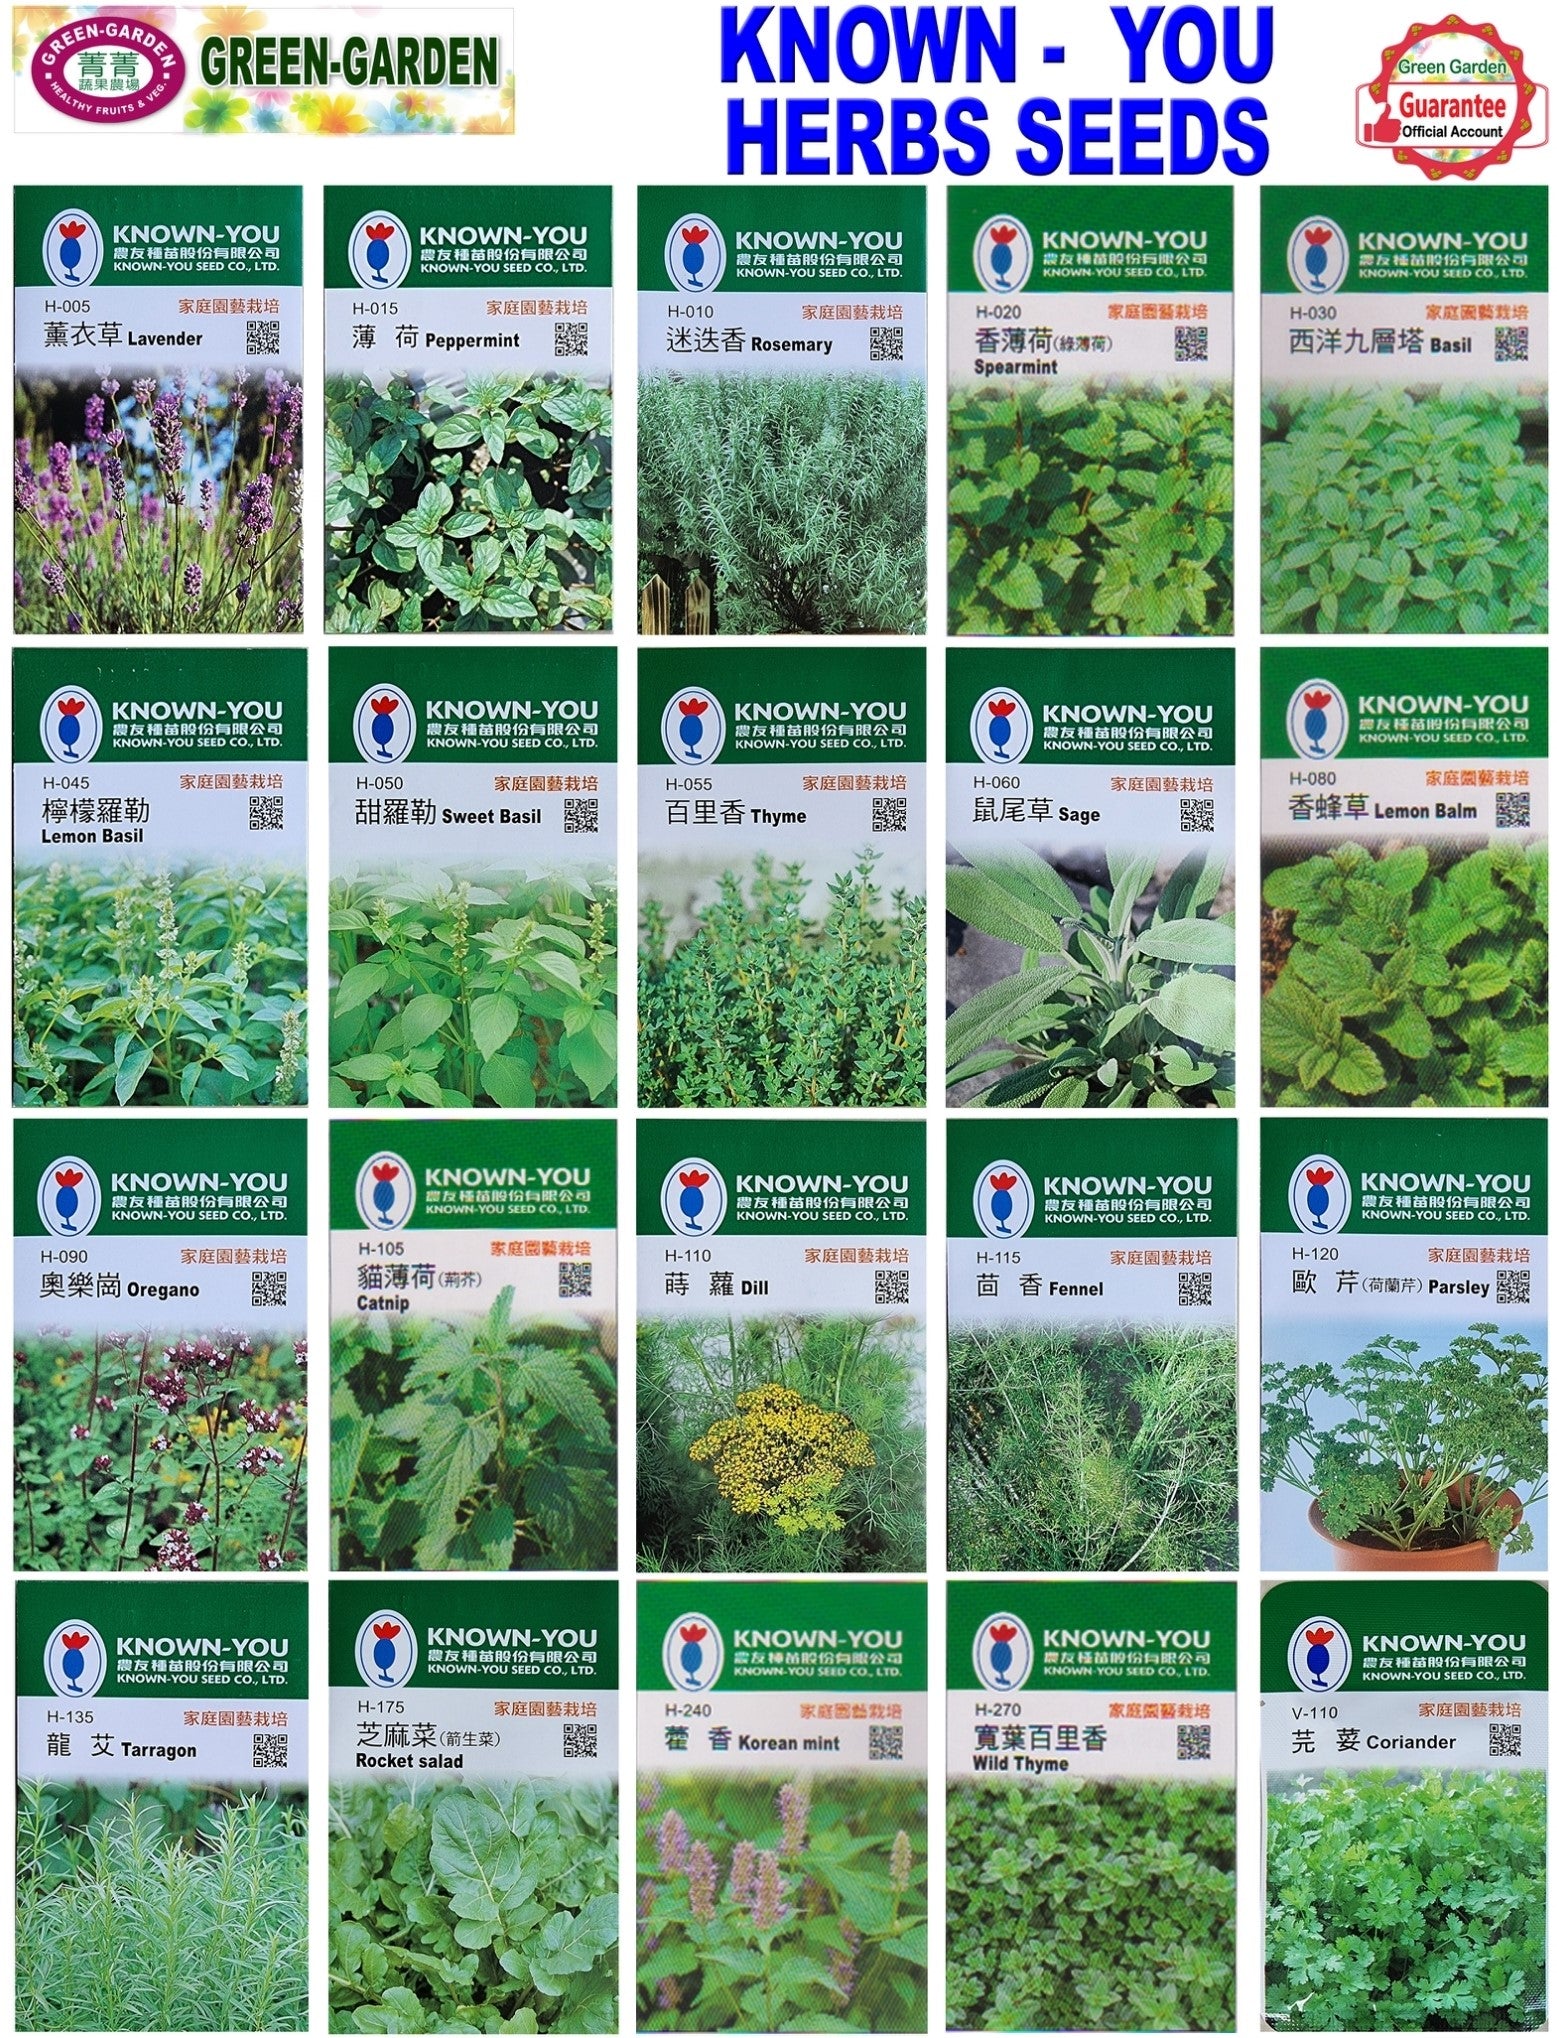 Known You Herbs Seeds (H-120 Parsley)